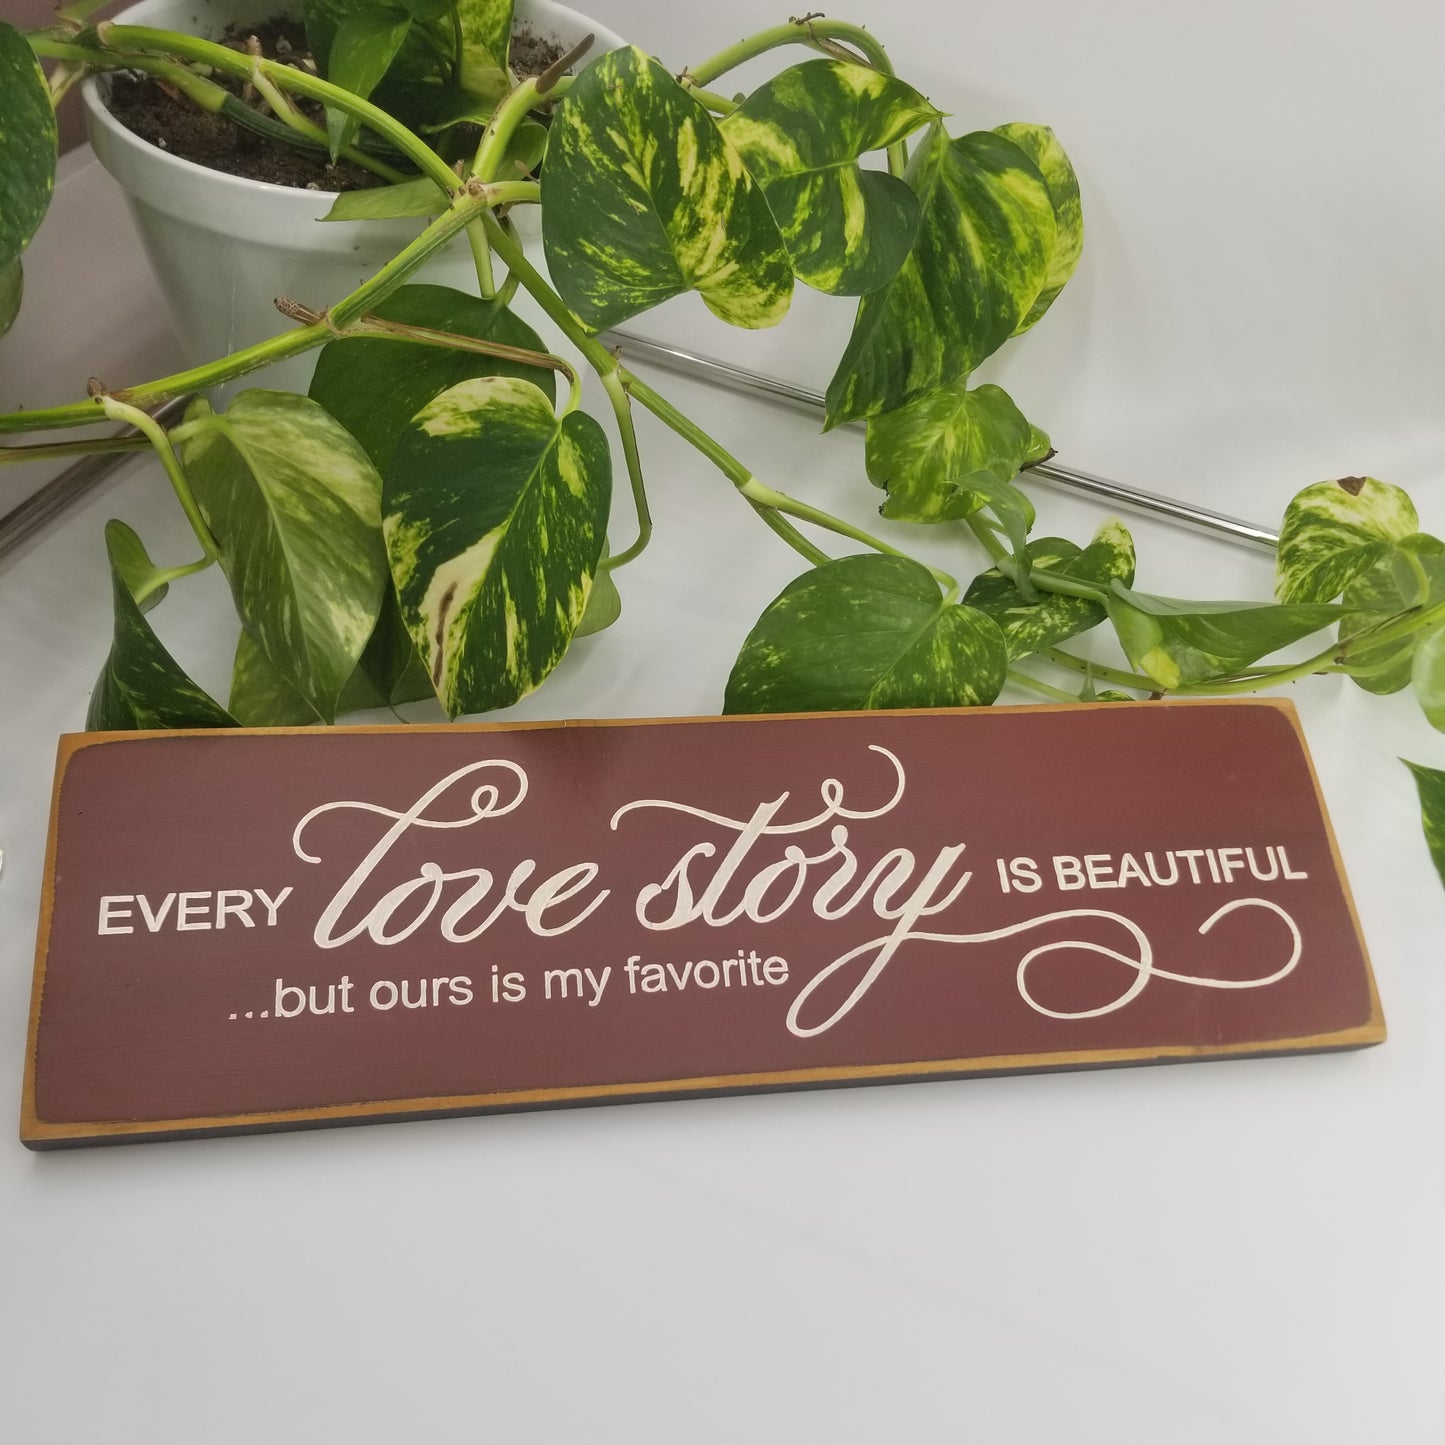 Love story wooden sign 